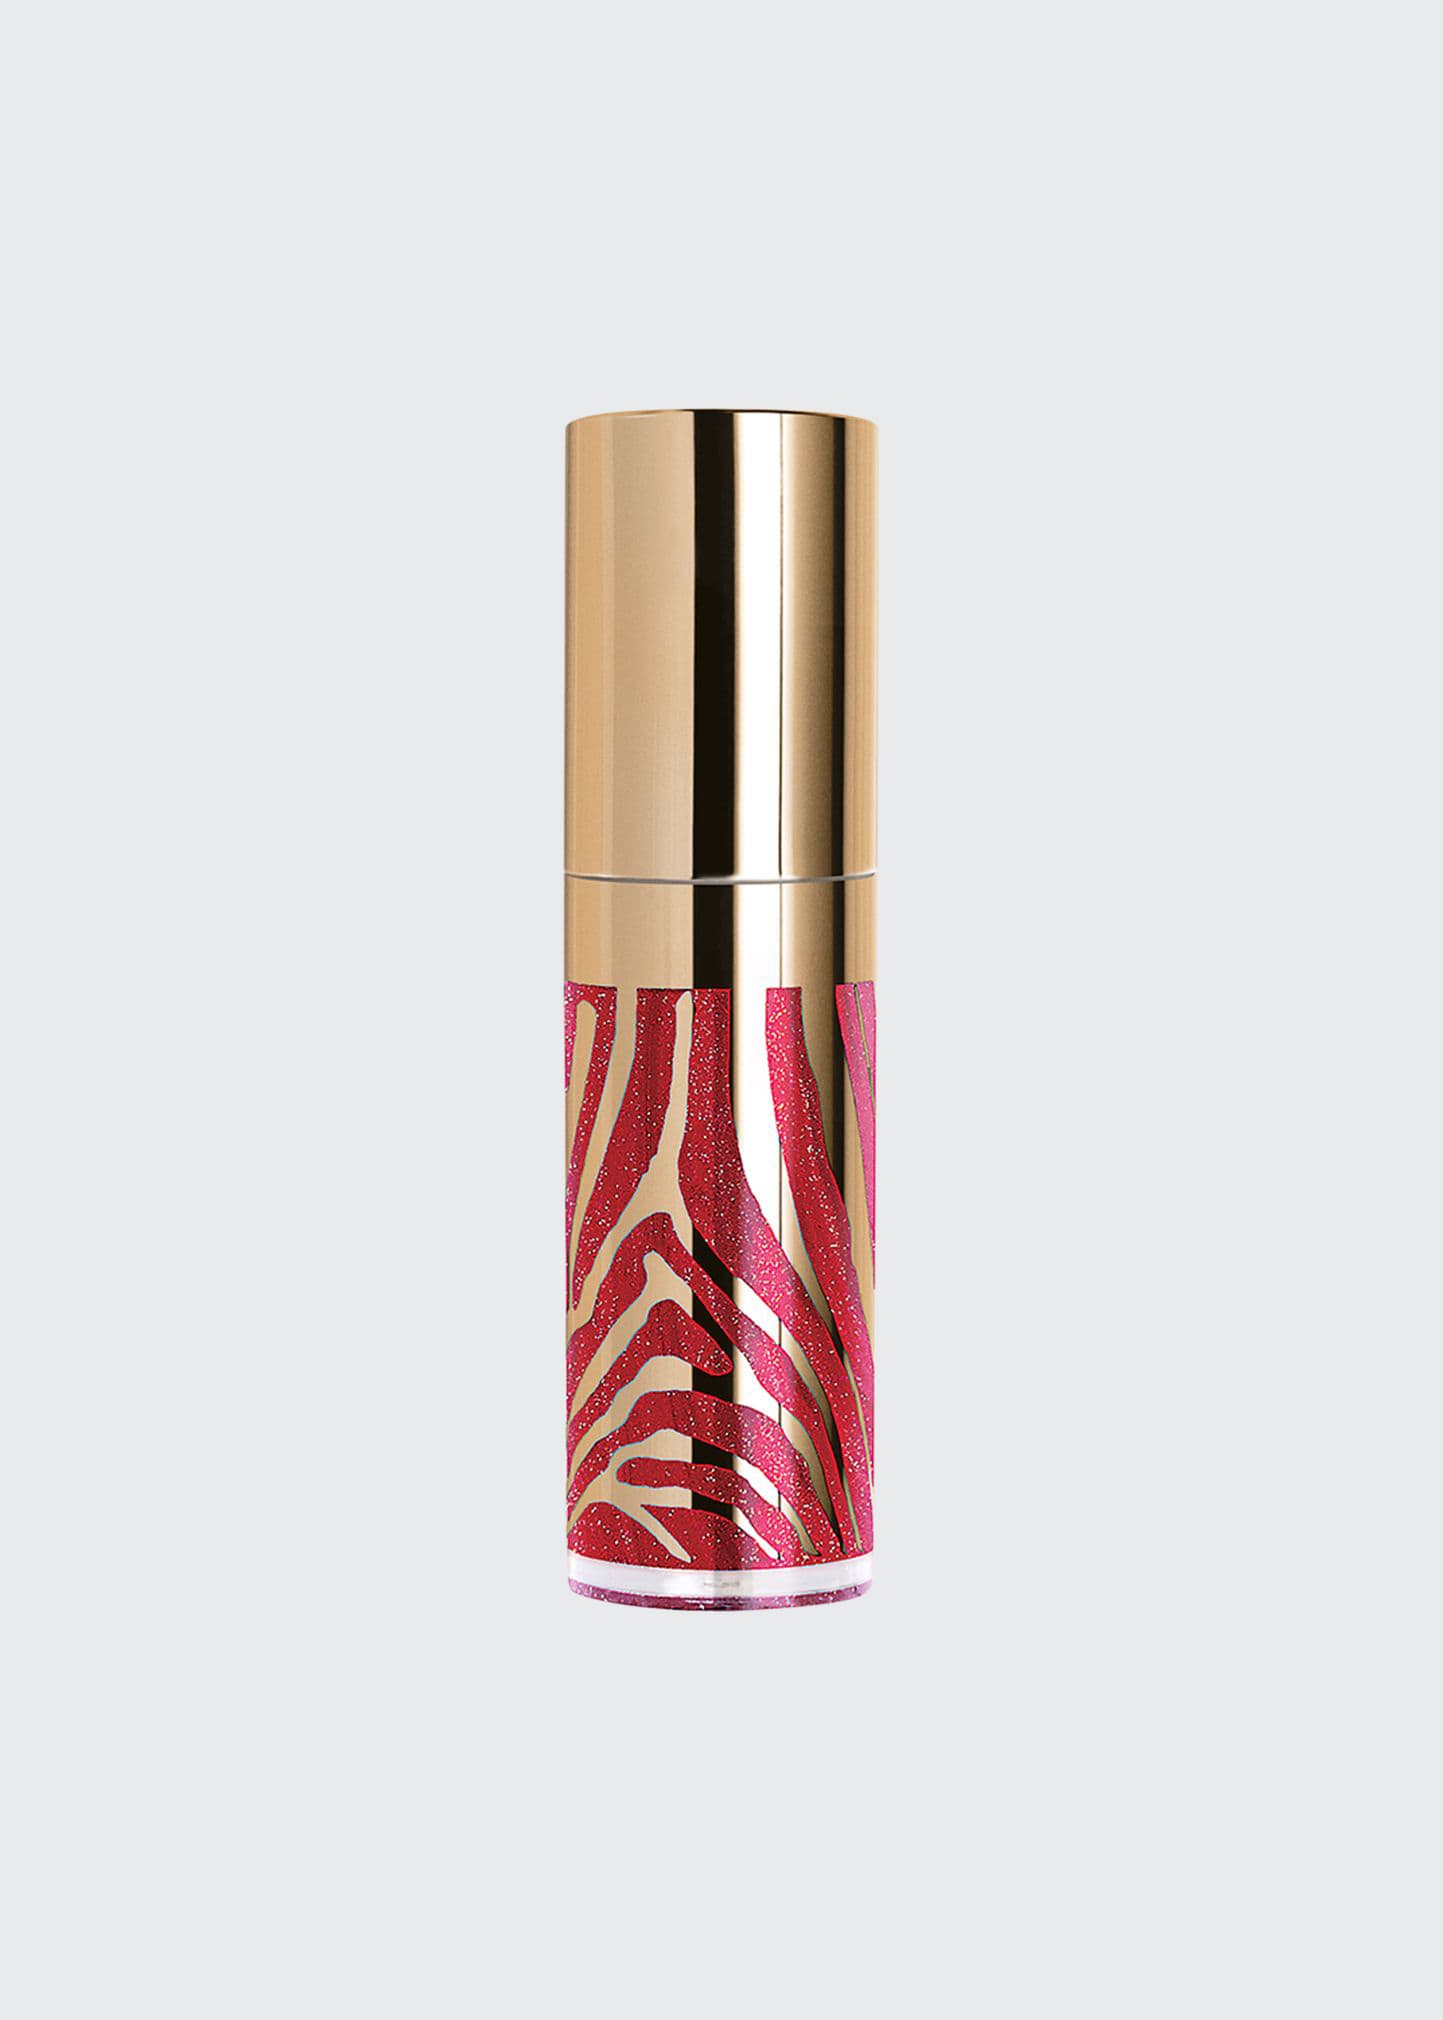 Sisley Paris Le Phyto-gloss In 5 Fireworks